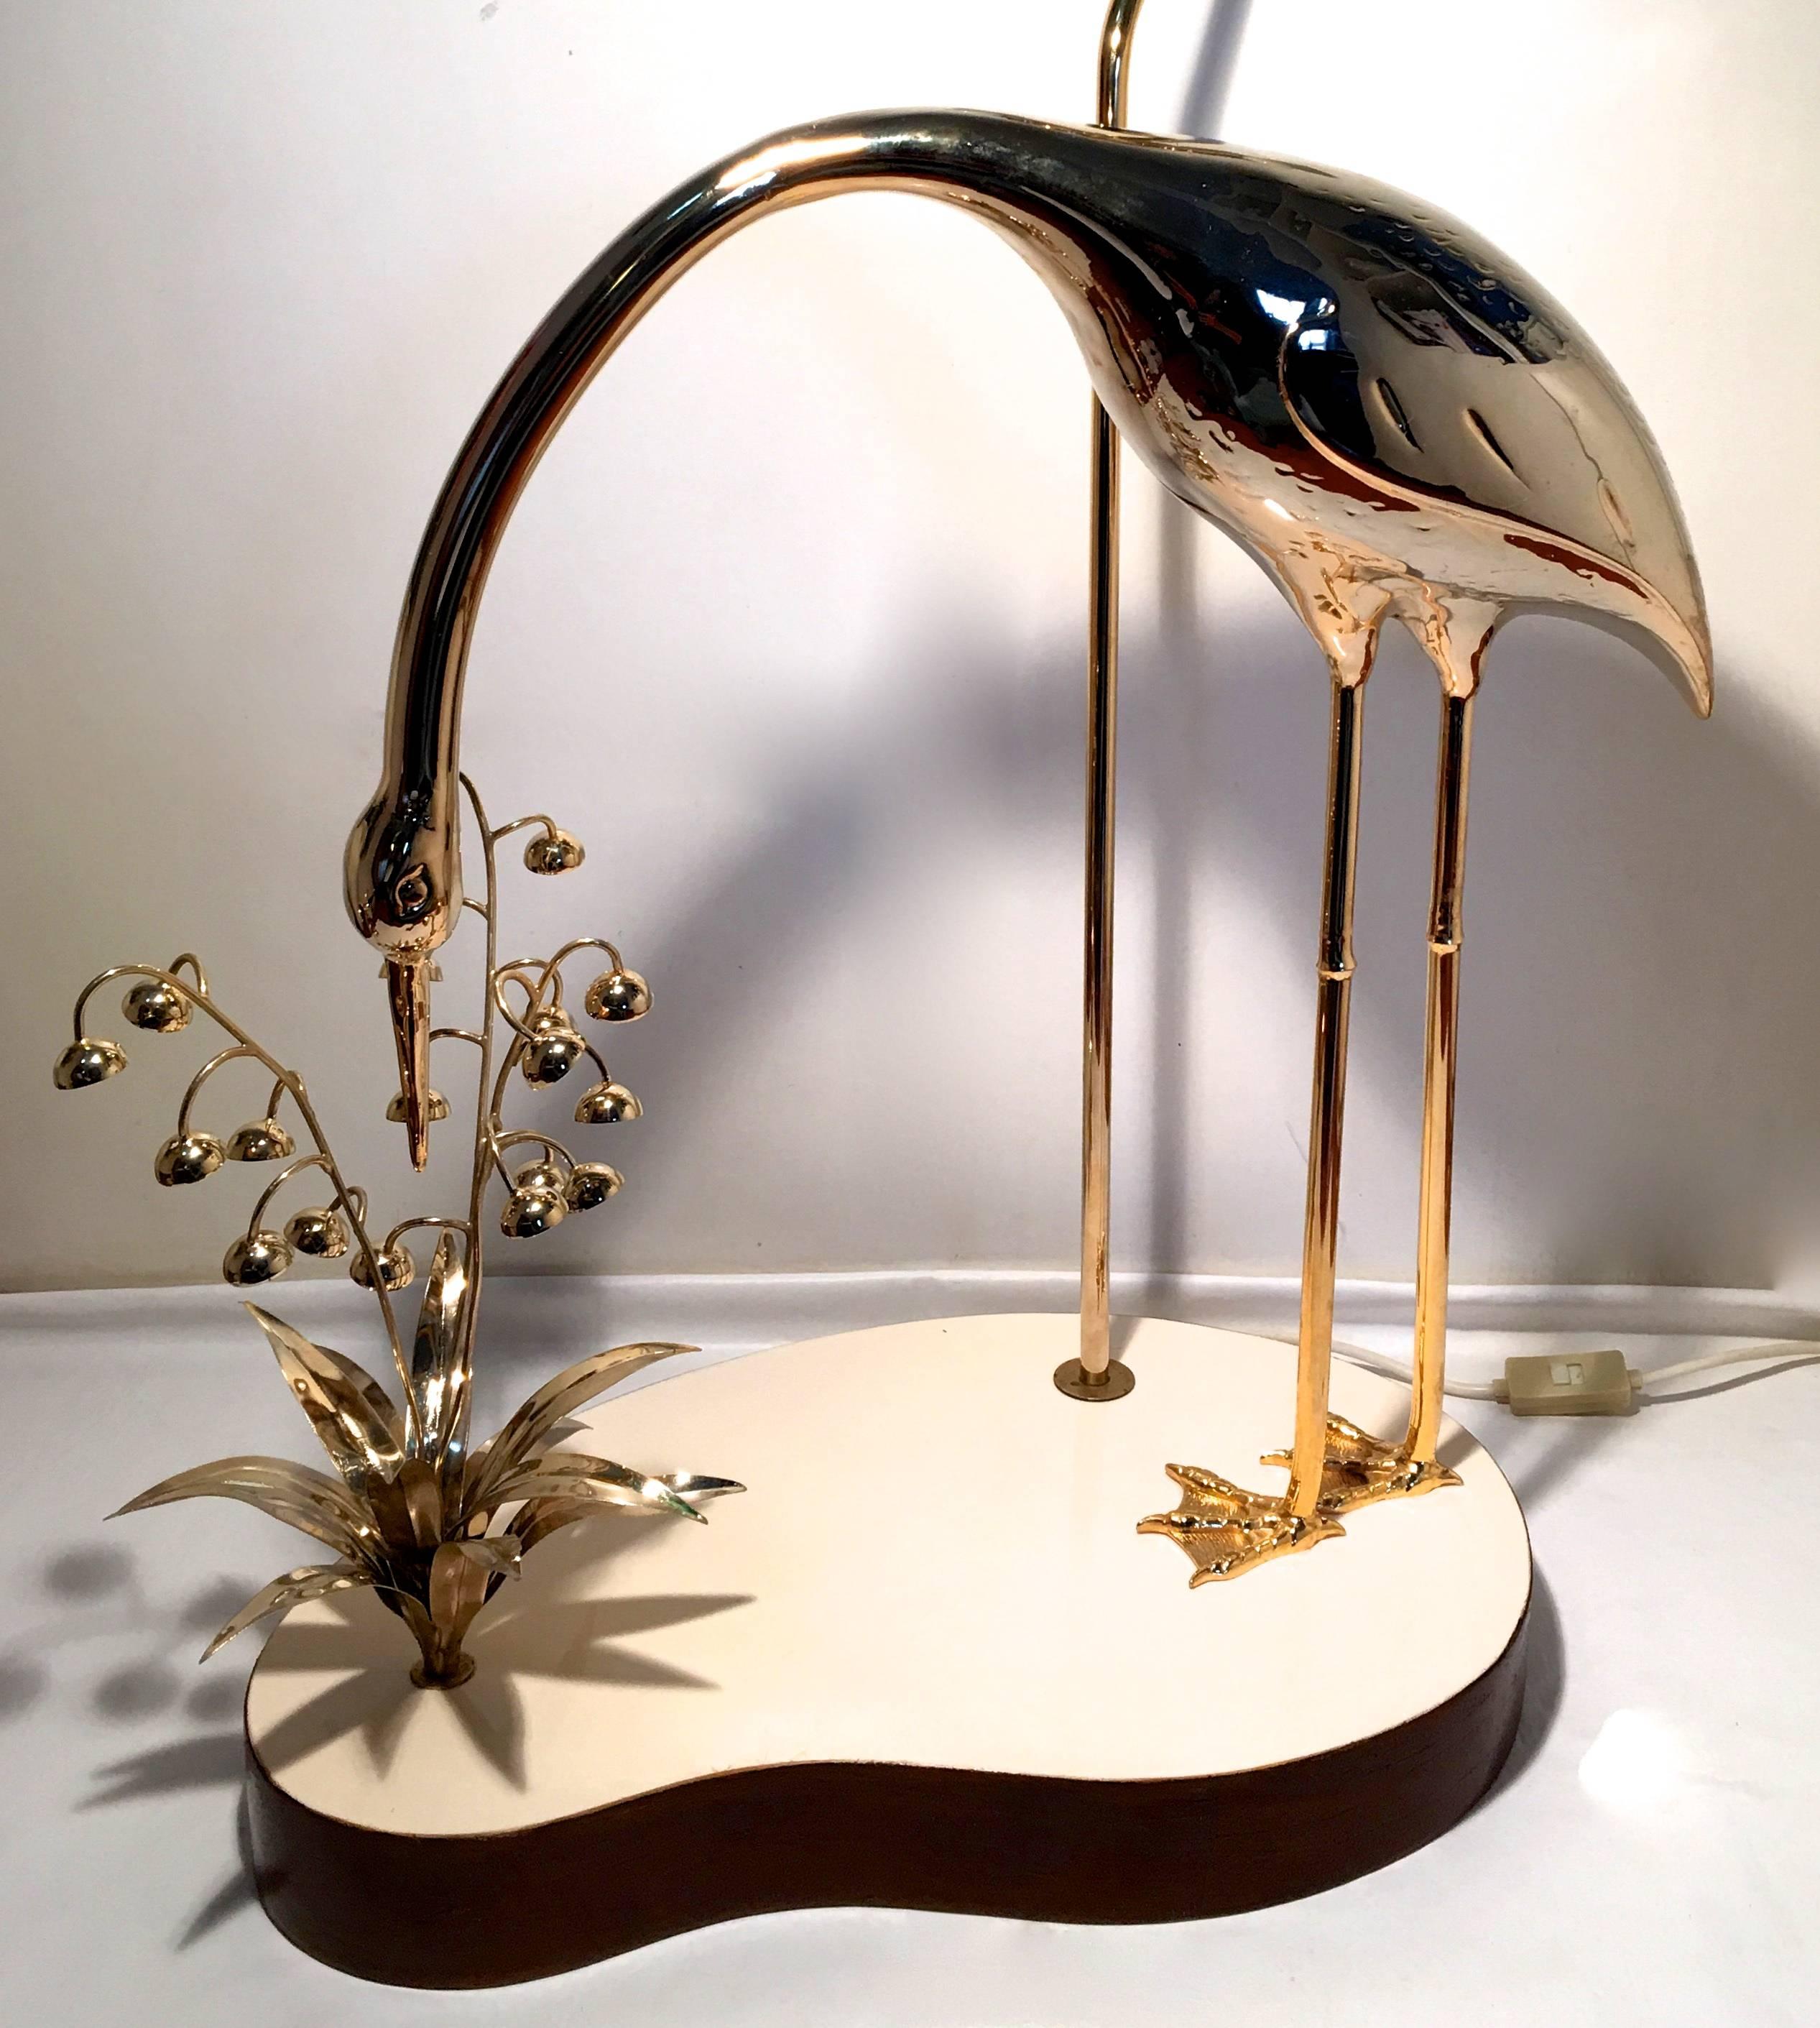 Glamorous floor lamp with a gold colored sculpture of a heron sniffing a blossoming flower.
With very nice detail. The bird stands on a kidney shaped resin base with a mahogany lining. The lamp has two light fittings and any shade can be mounted